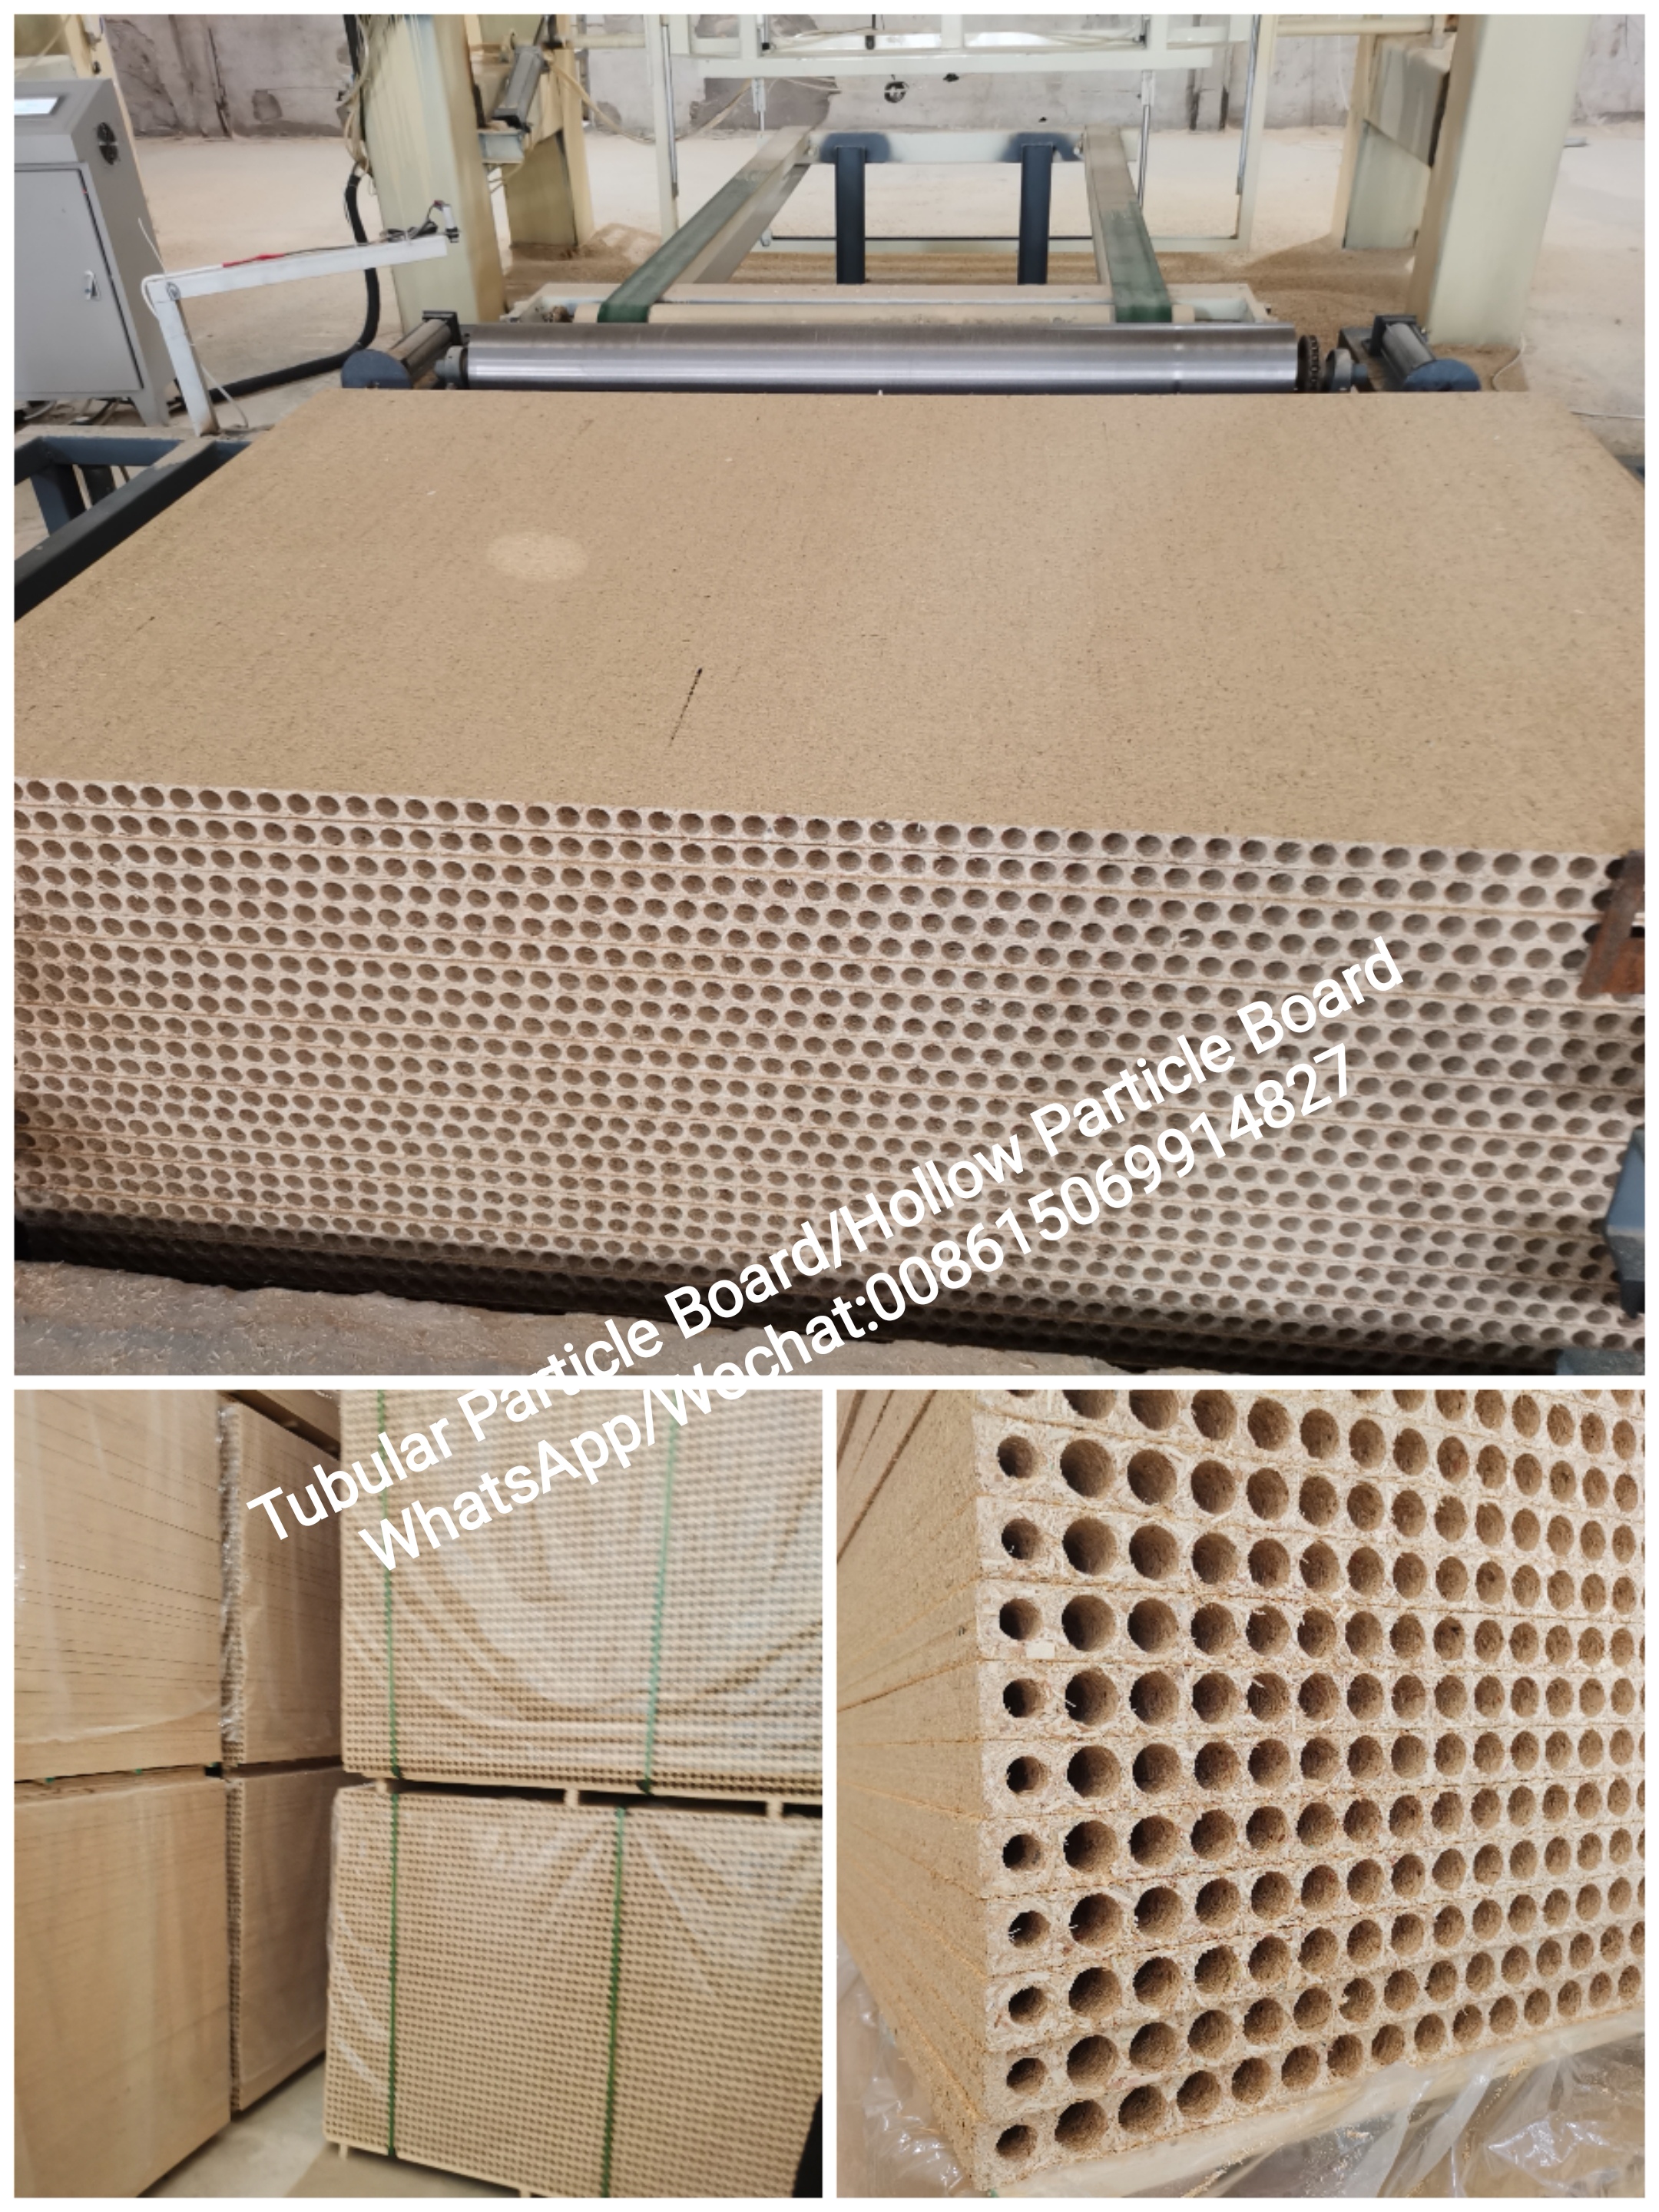 Particle Tubular Board/Particle Hollow board (图3)